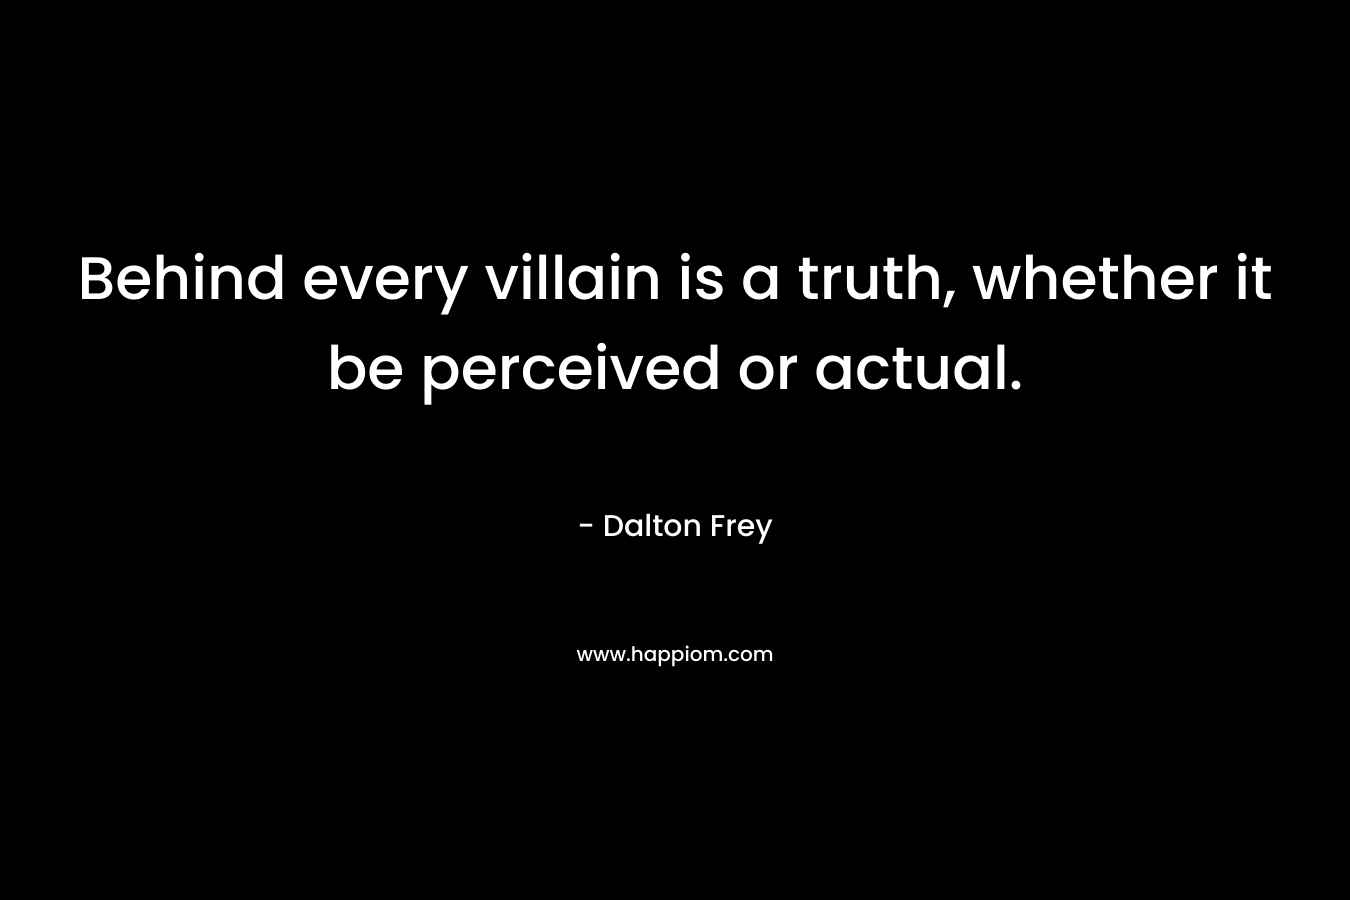 Behind every villain is a truth, whether it be perceived or actual.